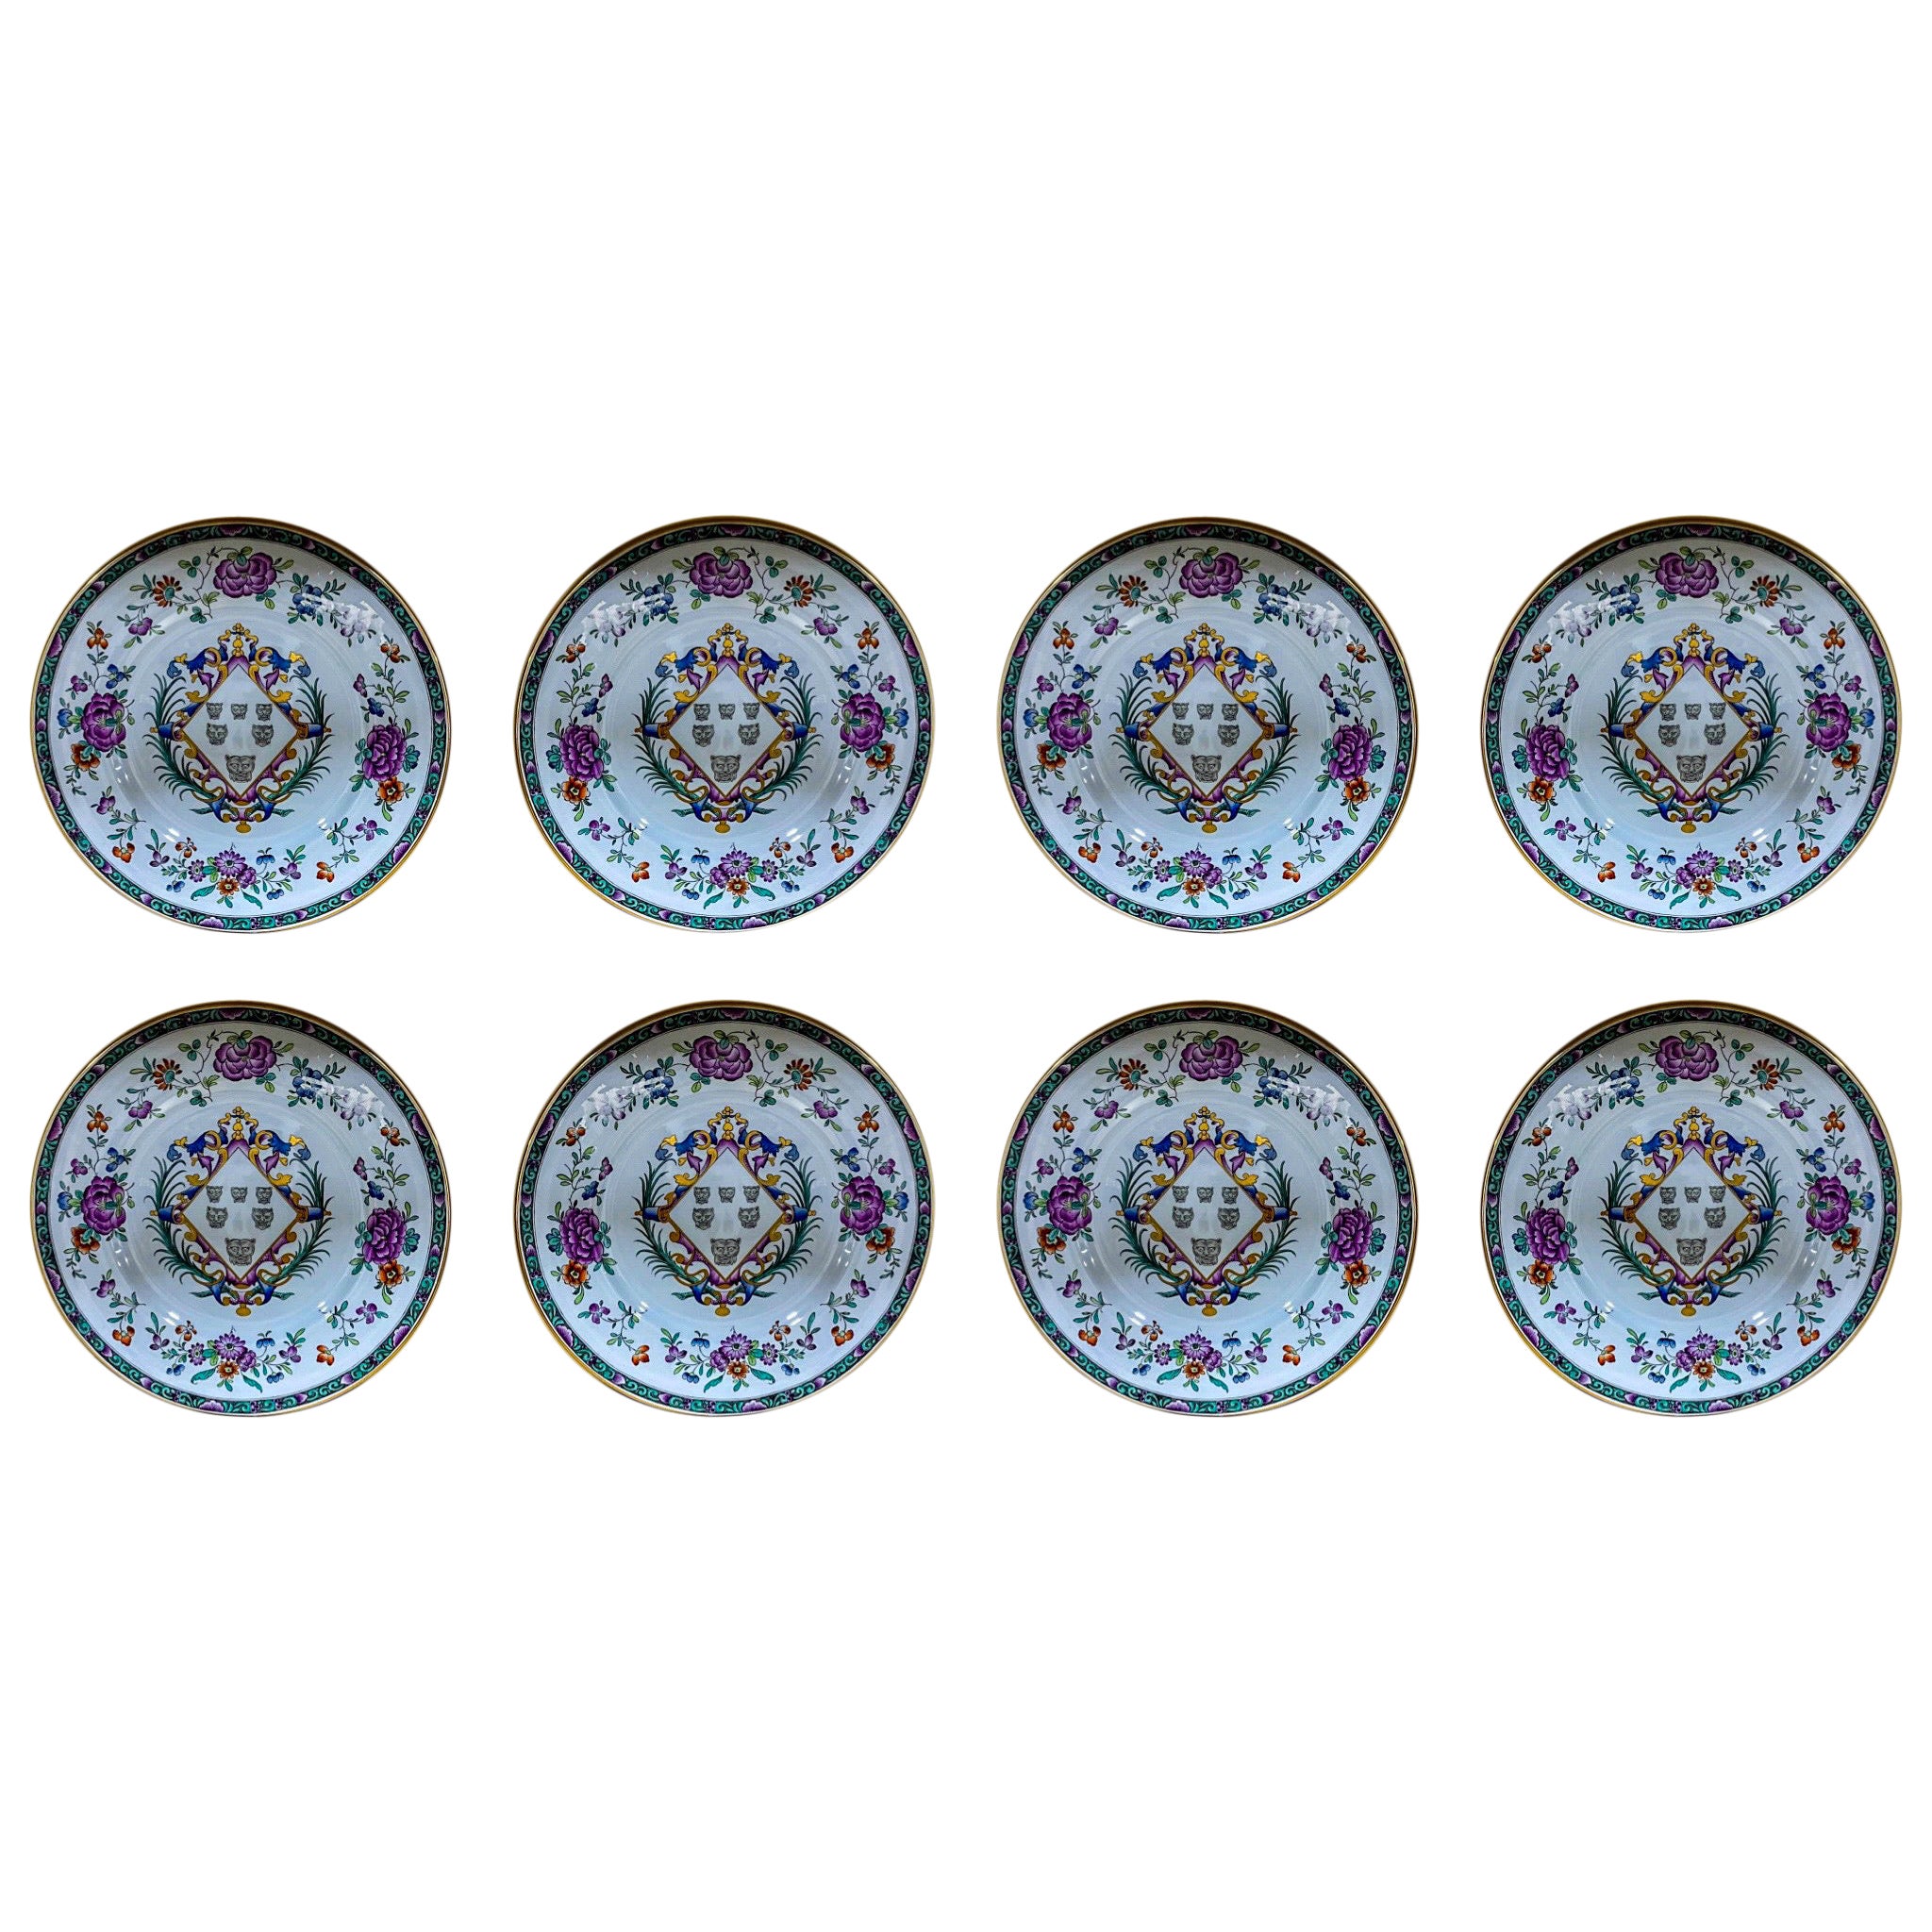 20th-C. English Copeland Spode for Tiffany & Co. Armorial Plates, S/8 For Sale